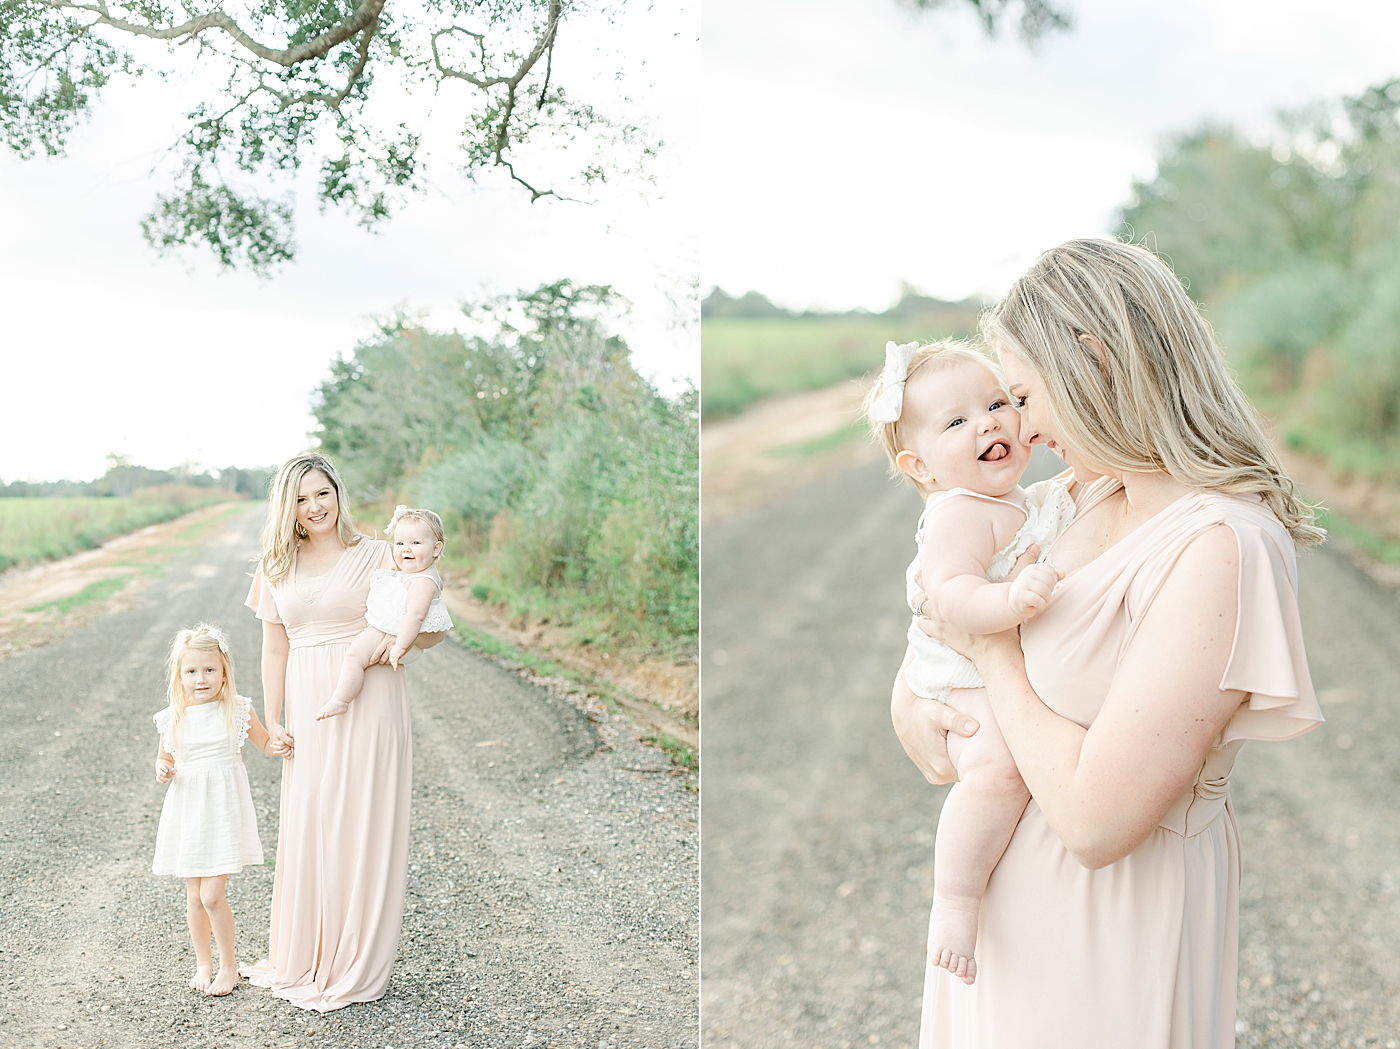 Mom interacting with daughters on a dirt path | Photo by Little Sunshine Photography 